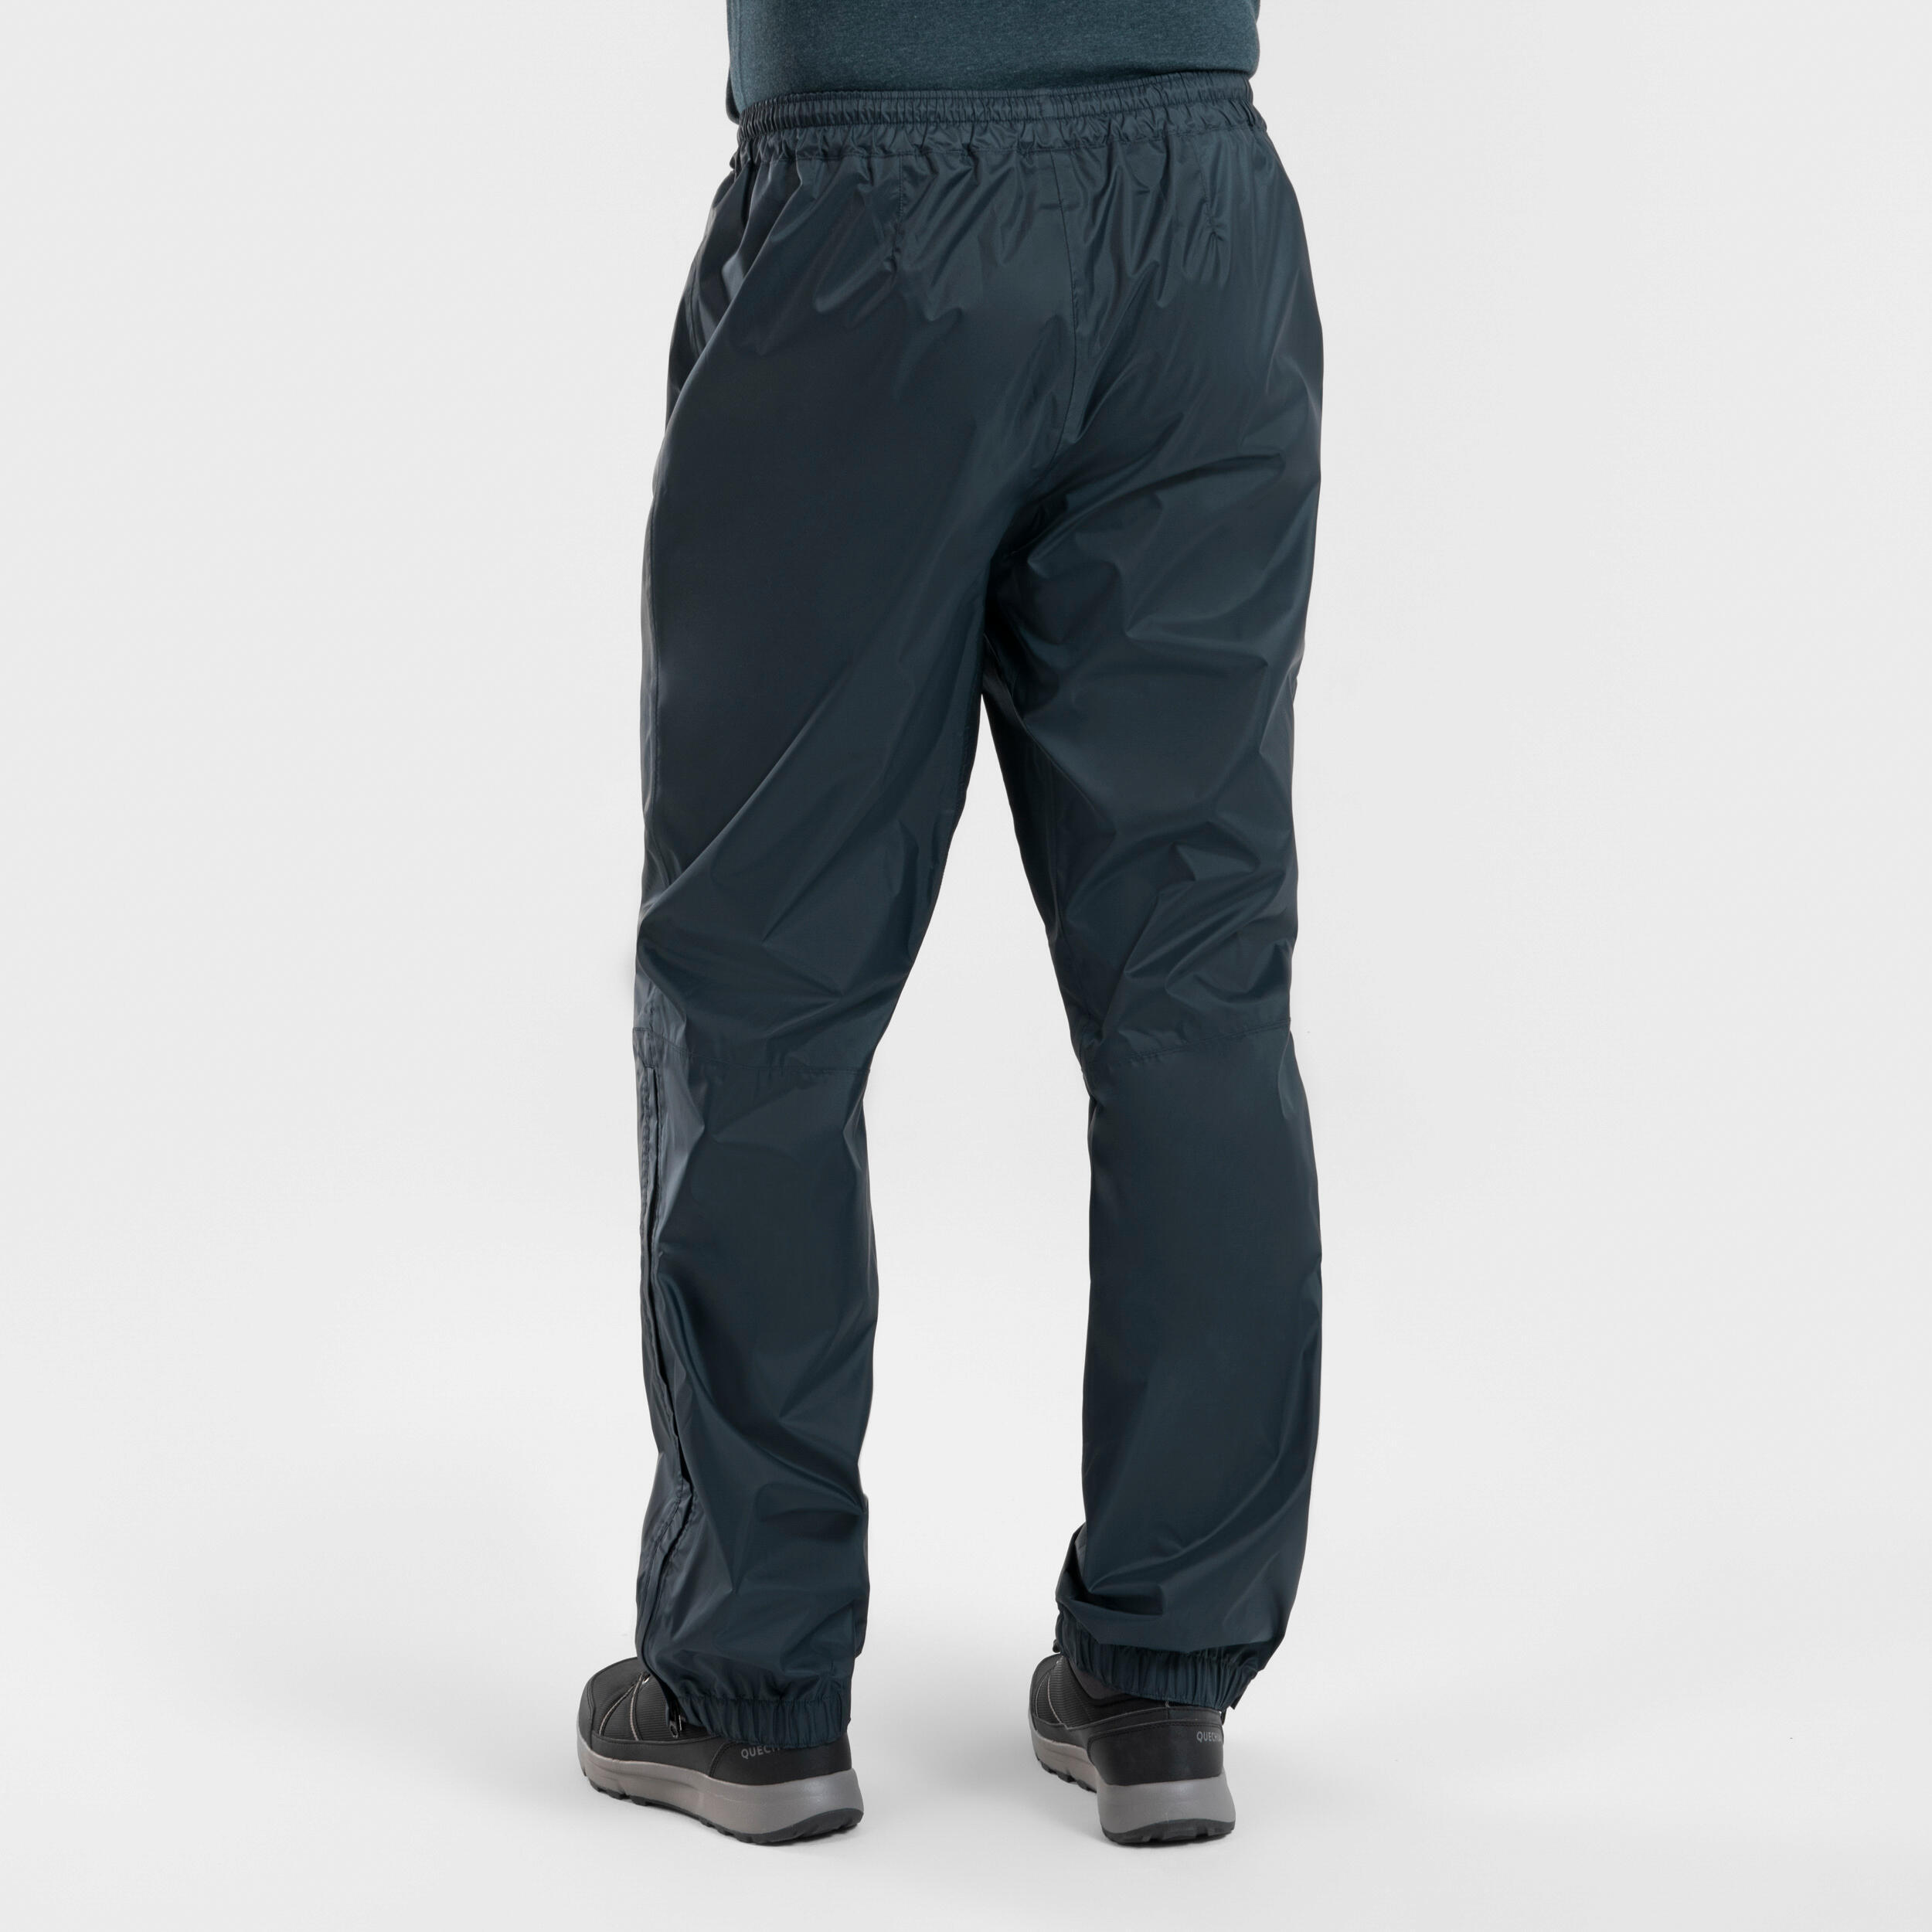 Men's Waterproof Hiking Over Trousers - NH500 Imper 3/4